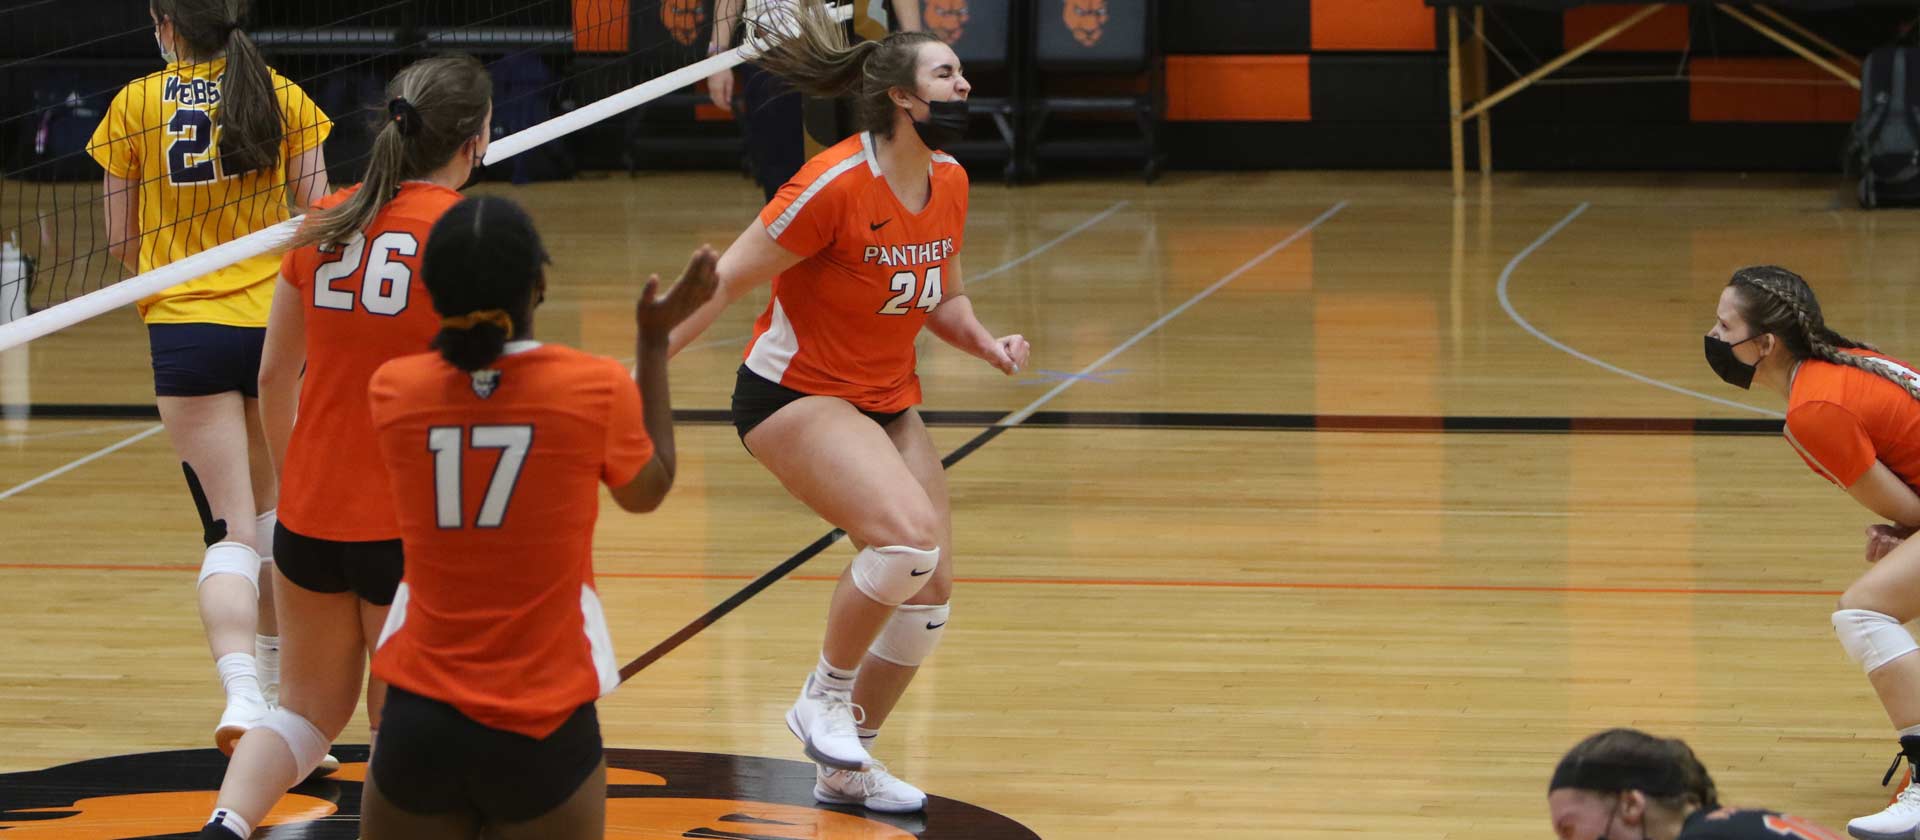 No. 16 women's volleyball downed by No. 15 Webster